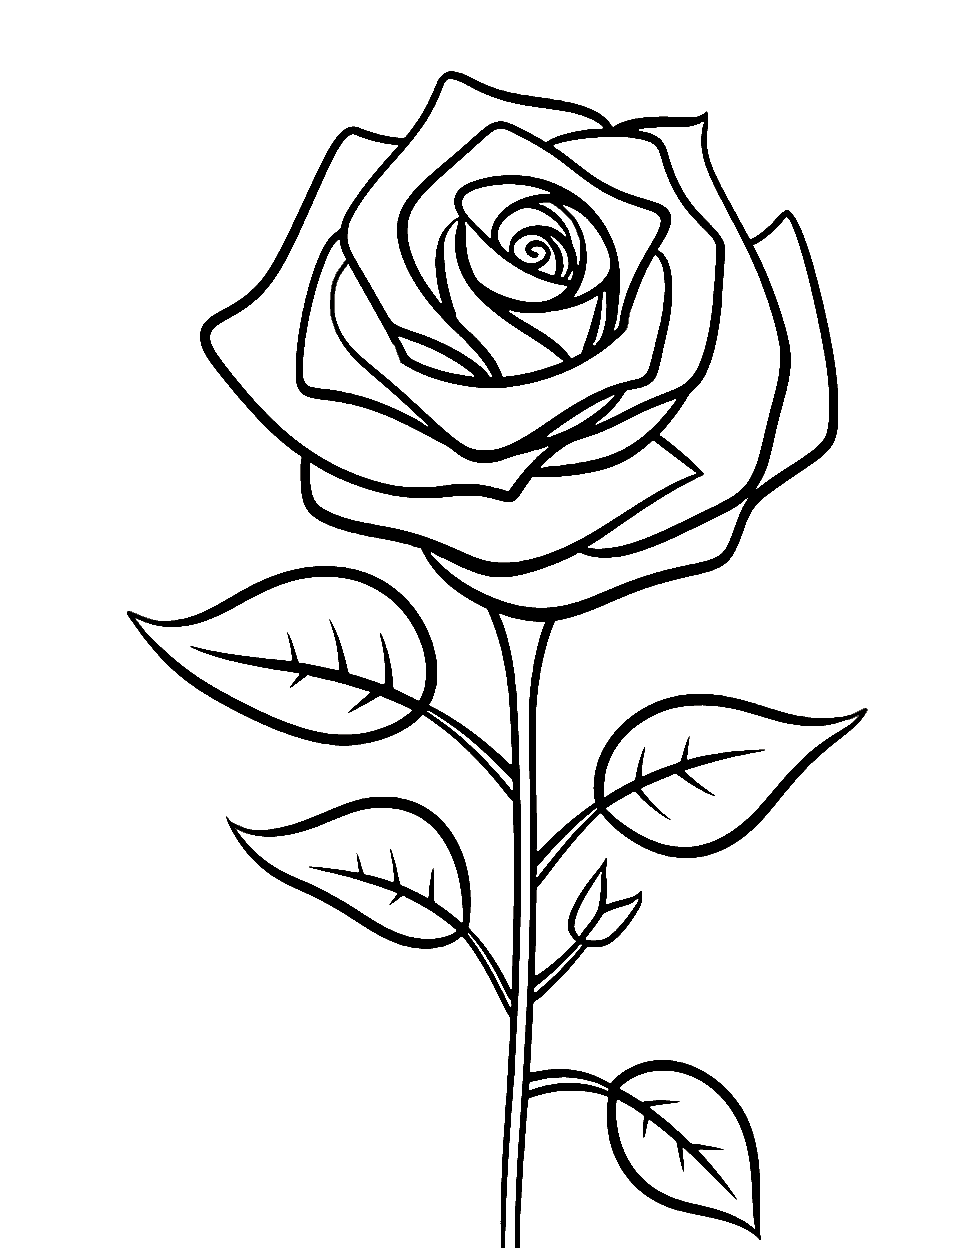 Easy Rose Line Art, Rose Flower Drawing for Kids, Natural Rose Coloring  Pages for Adults and Children Stock Vector - Illustration of cartoon,  doodle: 278686966